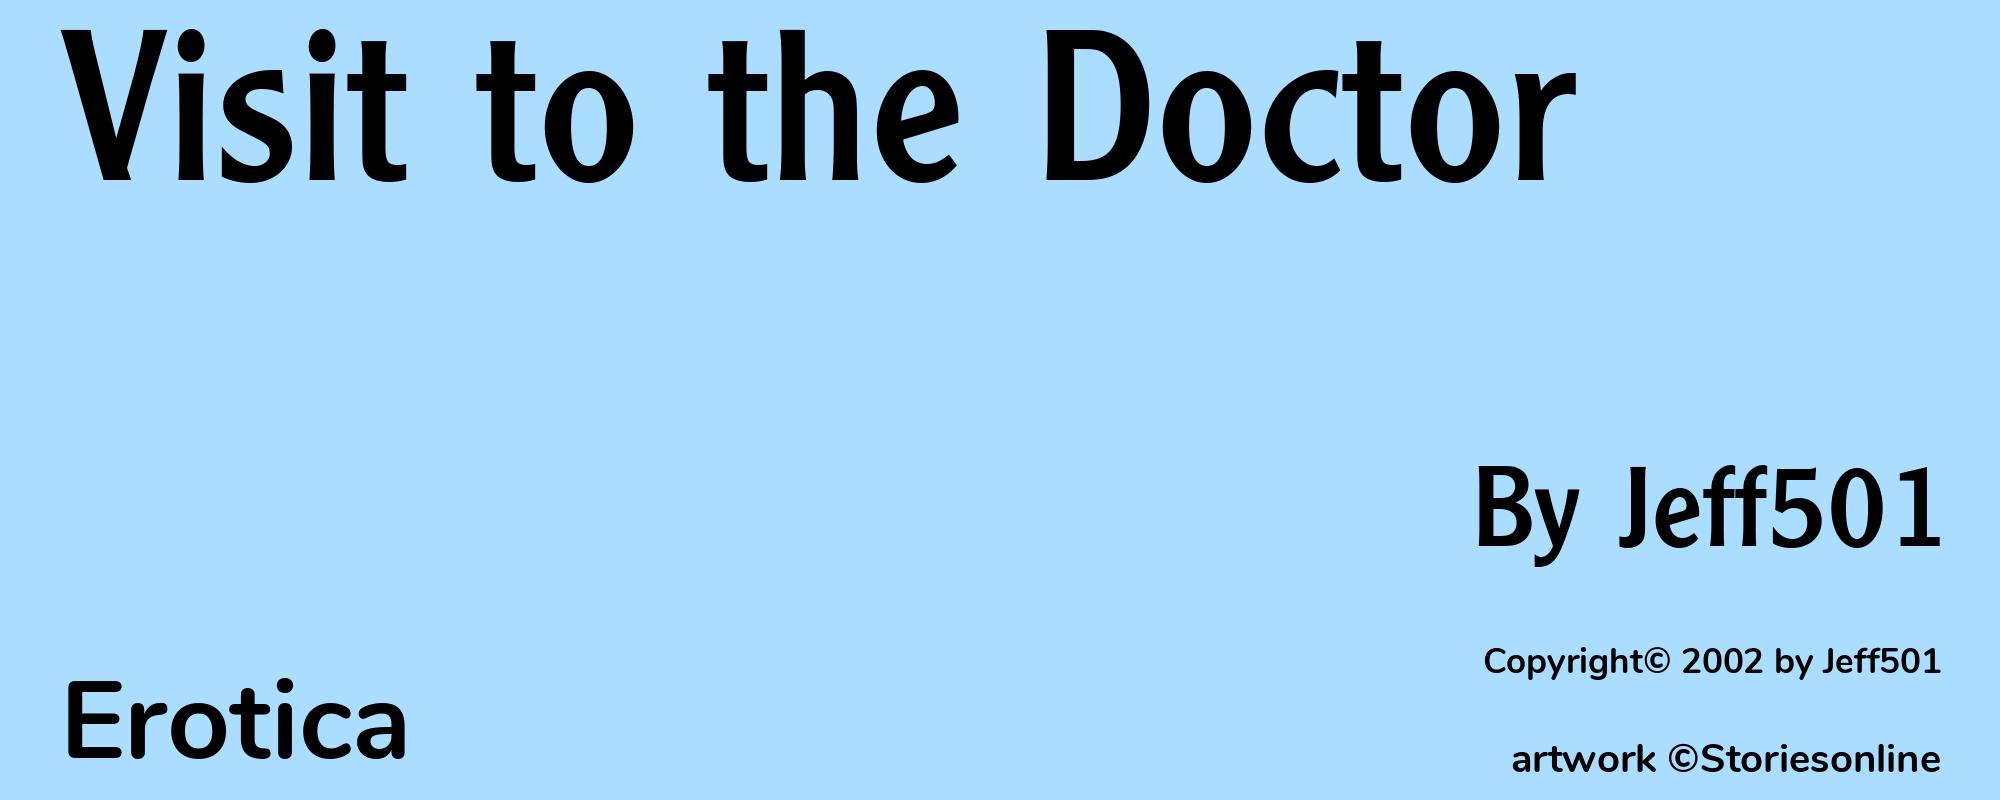 Visit to the Doctor - Cover